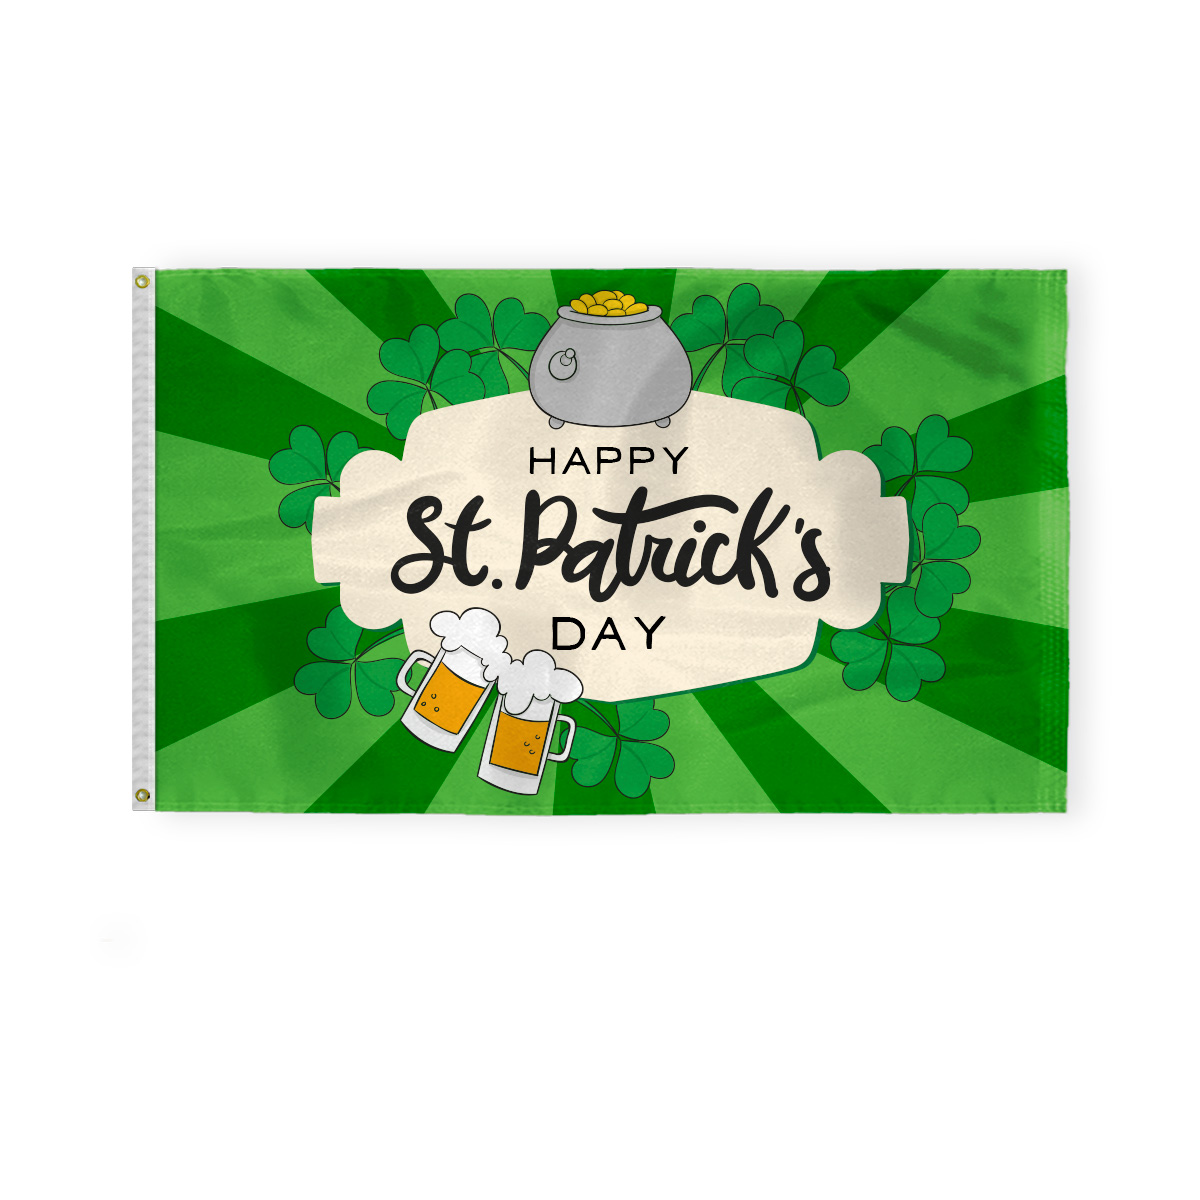 AGAS Happy St Patrick's Day Flag 3 x 5 Ft